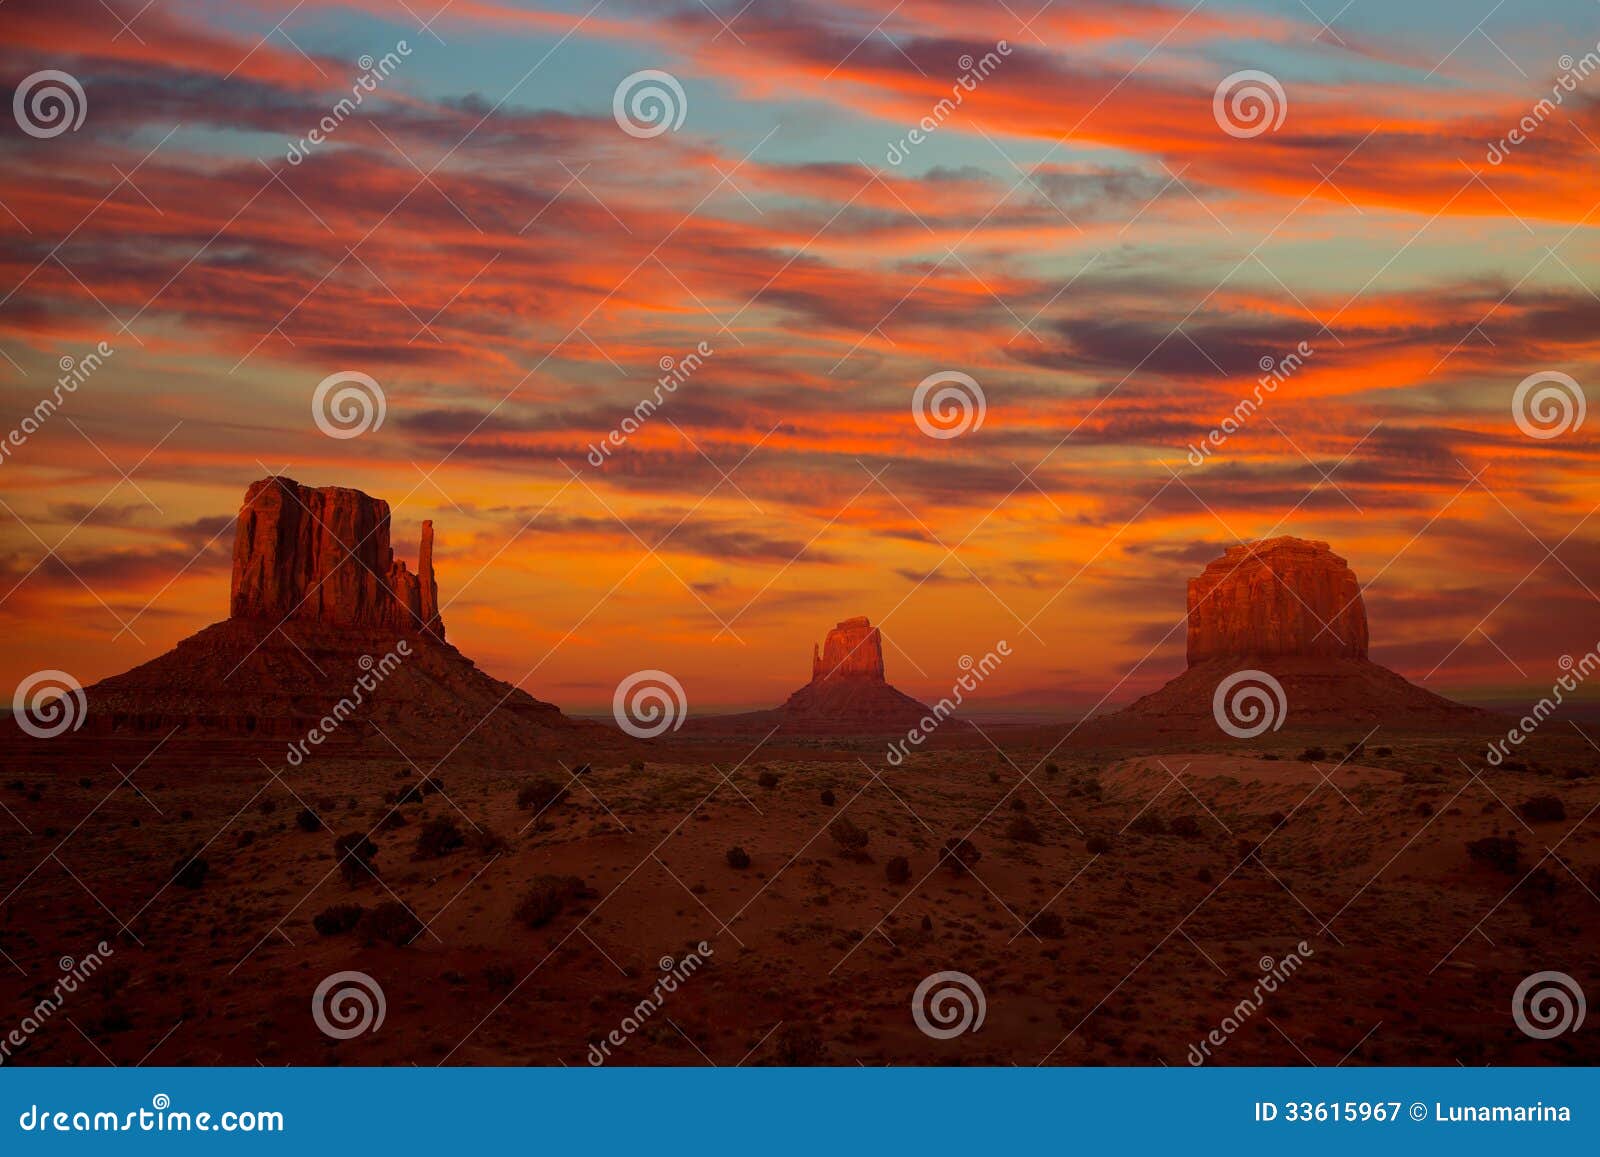 monument valley sunset mittens and merrick butte